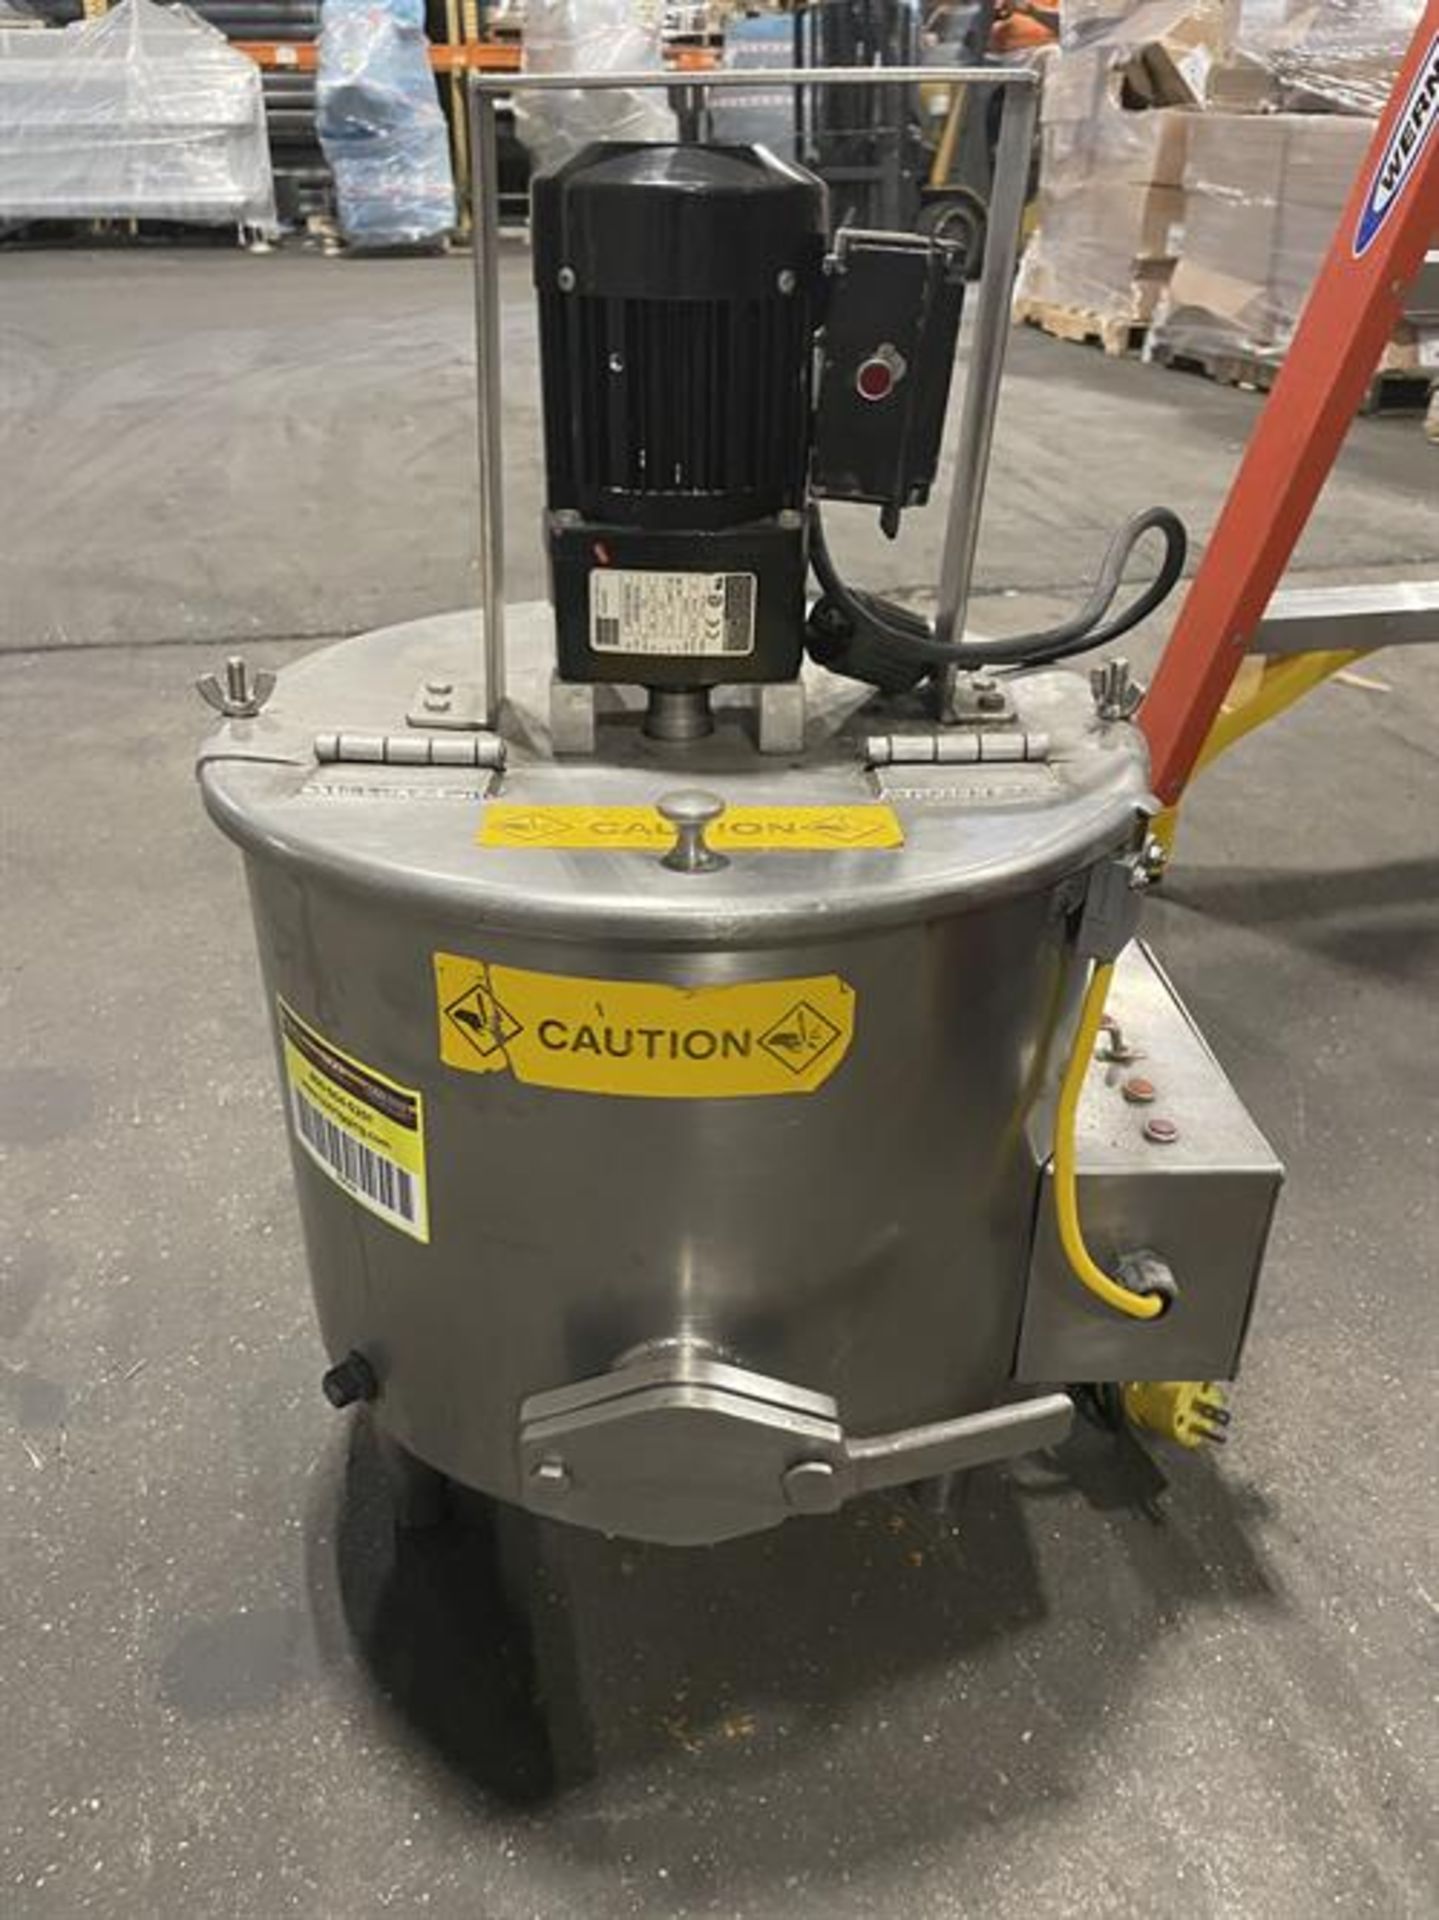 Savage 50-lb SS Chocolate Melter - Model 50 C.M.T. - Serial number 138 - Jacketed and agitated